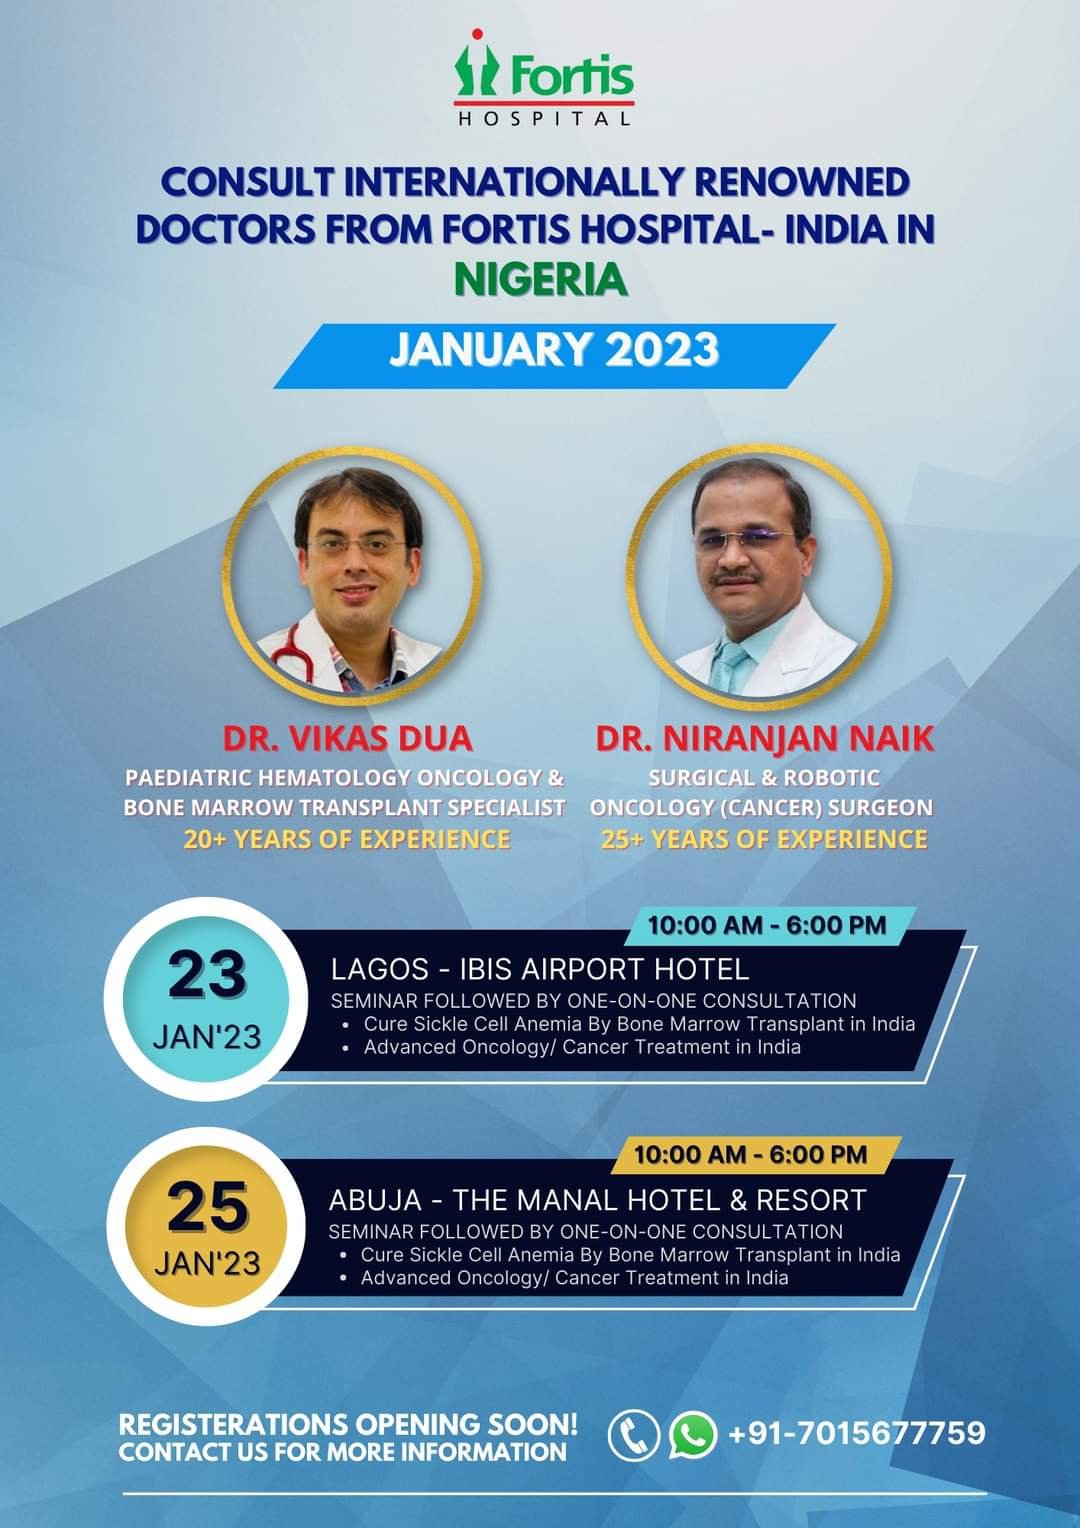 “In Collaboration with Medsurge India, Best Doctor’s of Fortis Hospital will Hold a Free Health Check-Up Camp in Nigeria”